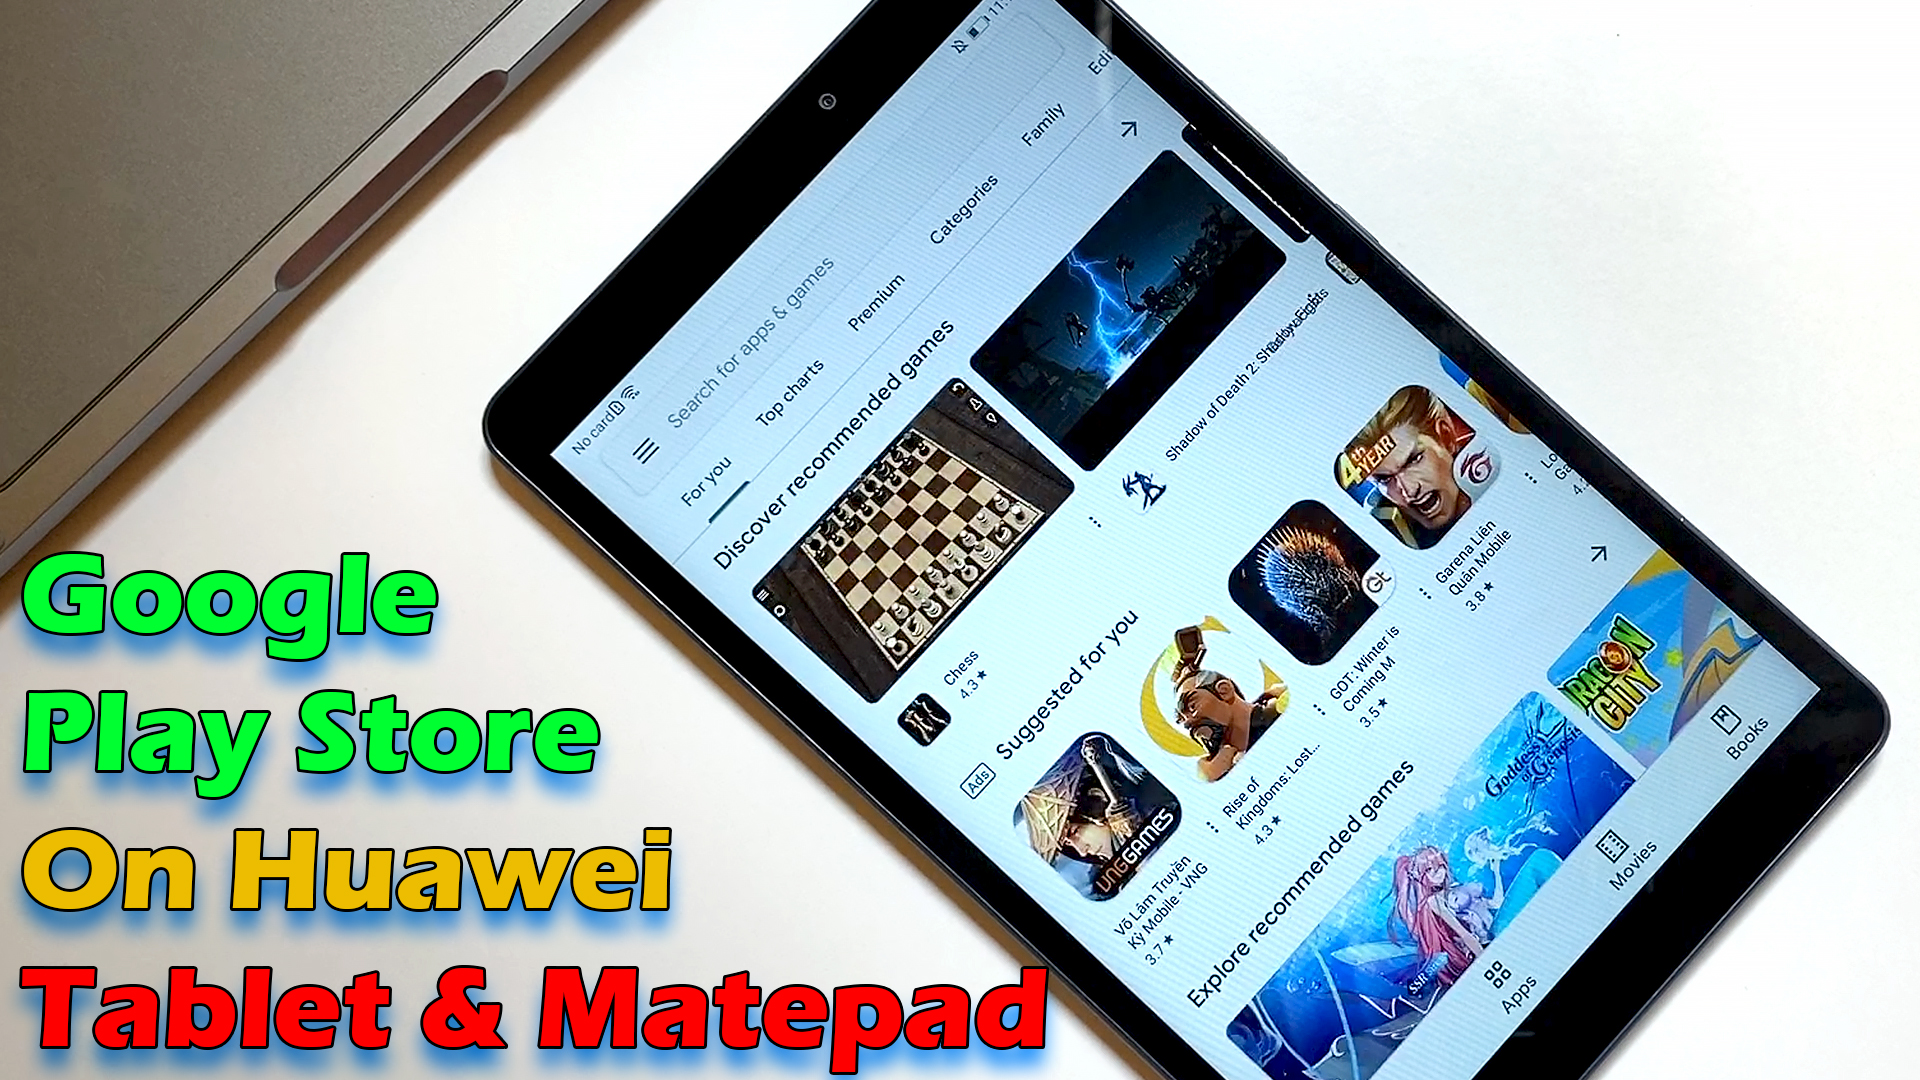 10 Minutes Install Google Play Store On Huawei Tablet